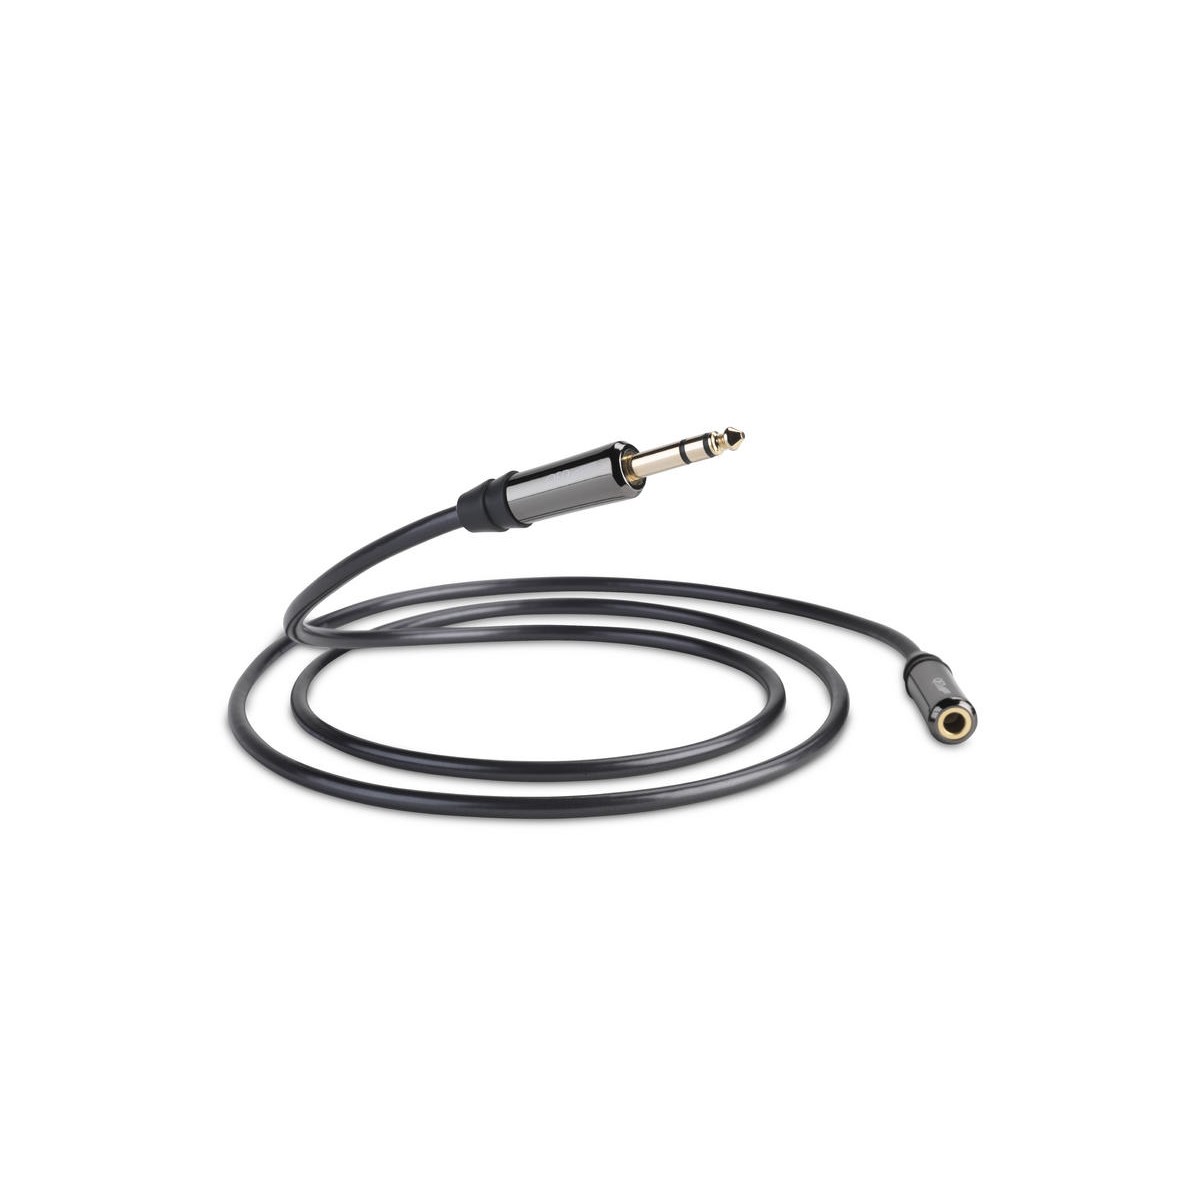 QED PERFORMANCE Stereo kabelis [6.3mm M stereo - 6.3mm M stereo] - QE7306 (3.0m)